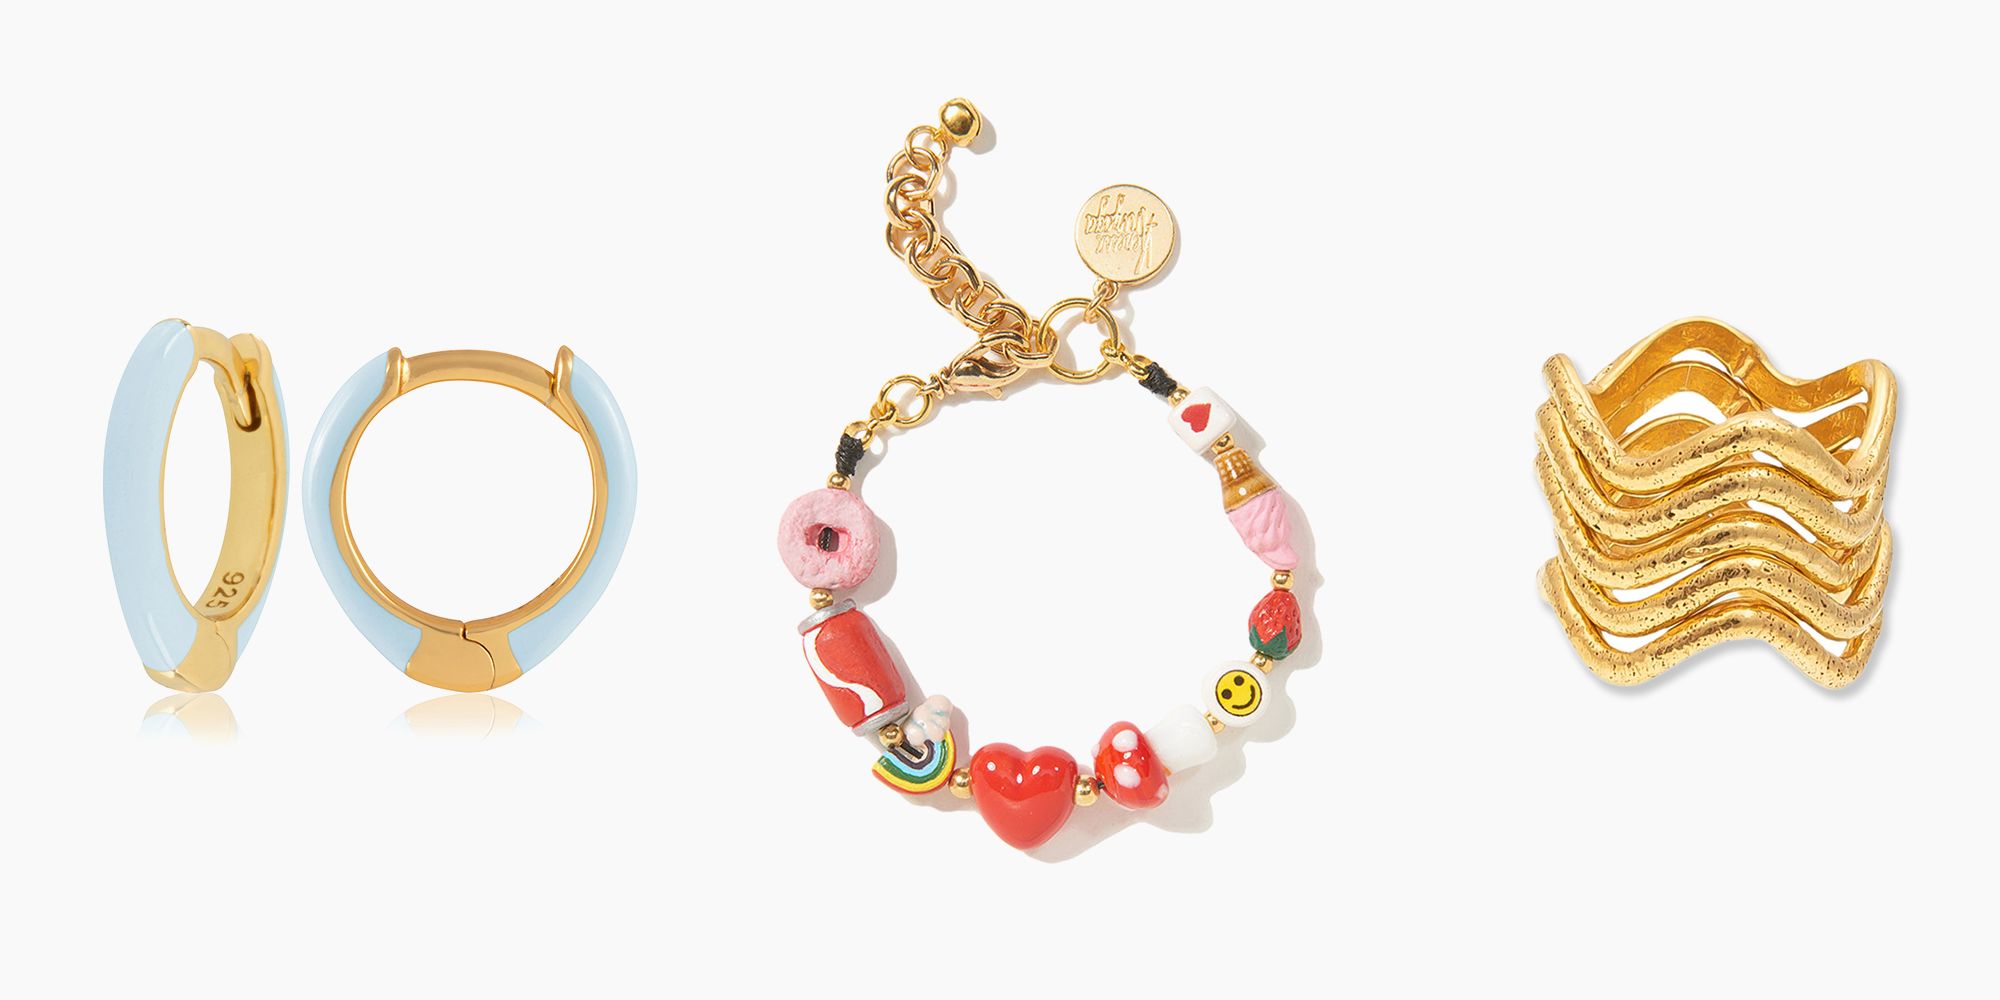 The 20 Jewelry Finds Amazon Shoppers Can't Get Enough Of